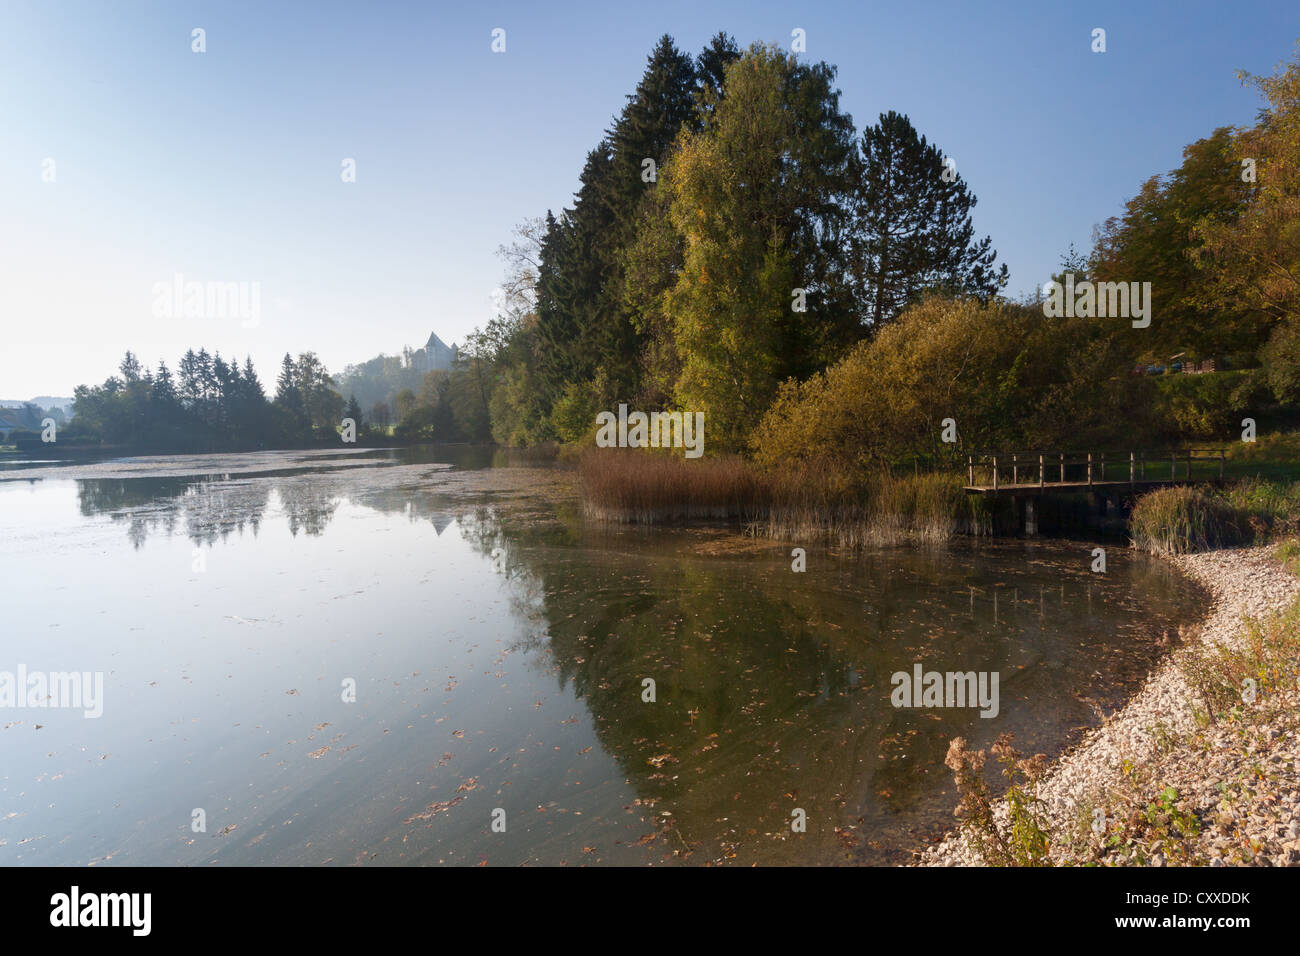 The natural outdoor swimming pool in Bad Groenenbach in the morning light, Allgaeu, Bavaria Stock Photo